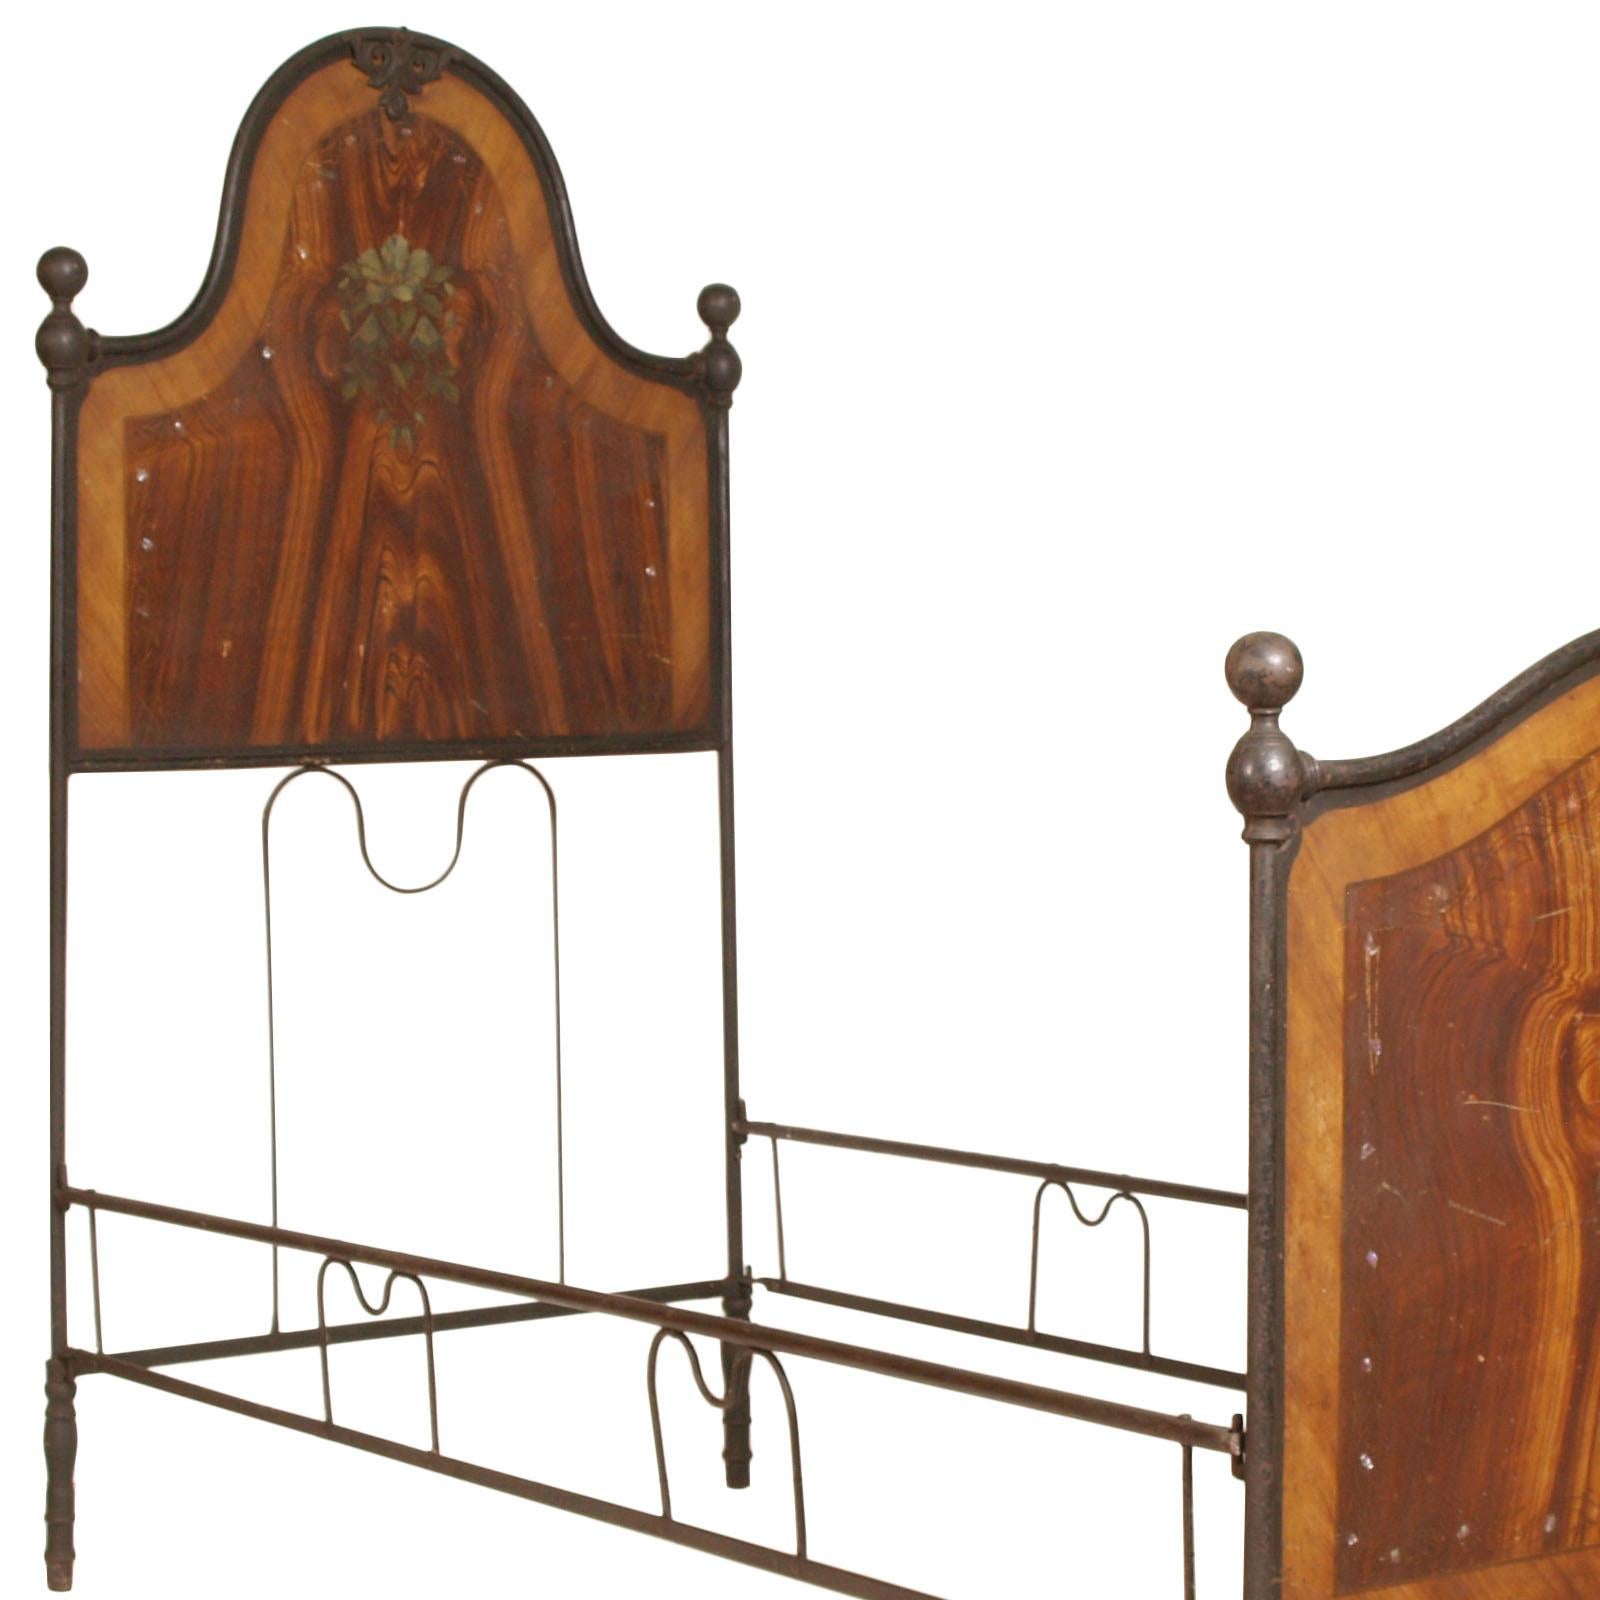 Romantic single bed in iron of the 19th century. Headboard and footboard enameled wood effect with floral decorations and mother of pearl scales.

Measures cm: H 170\104, W 95, D 205 (internal measures cm: 85 x 197).

 